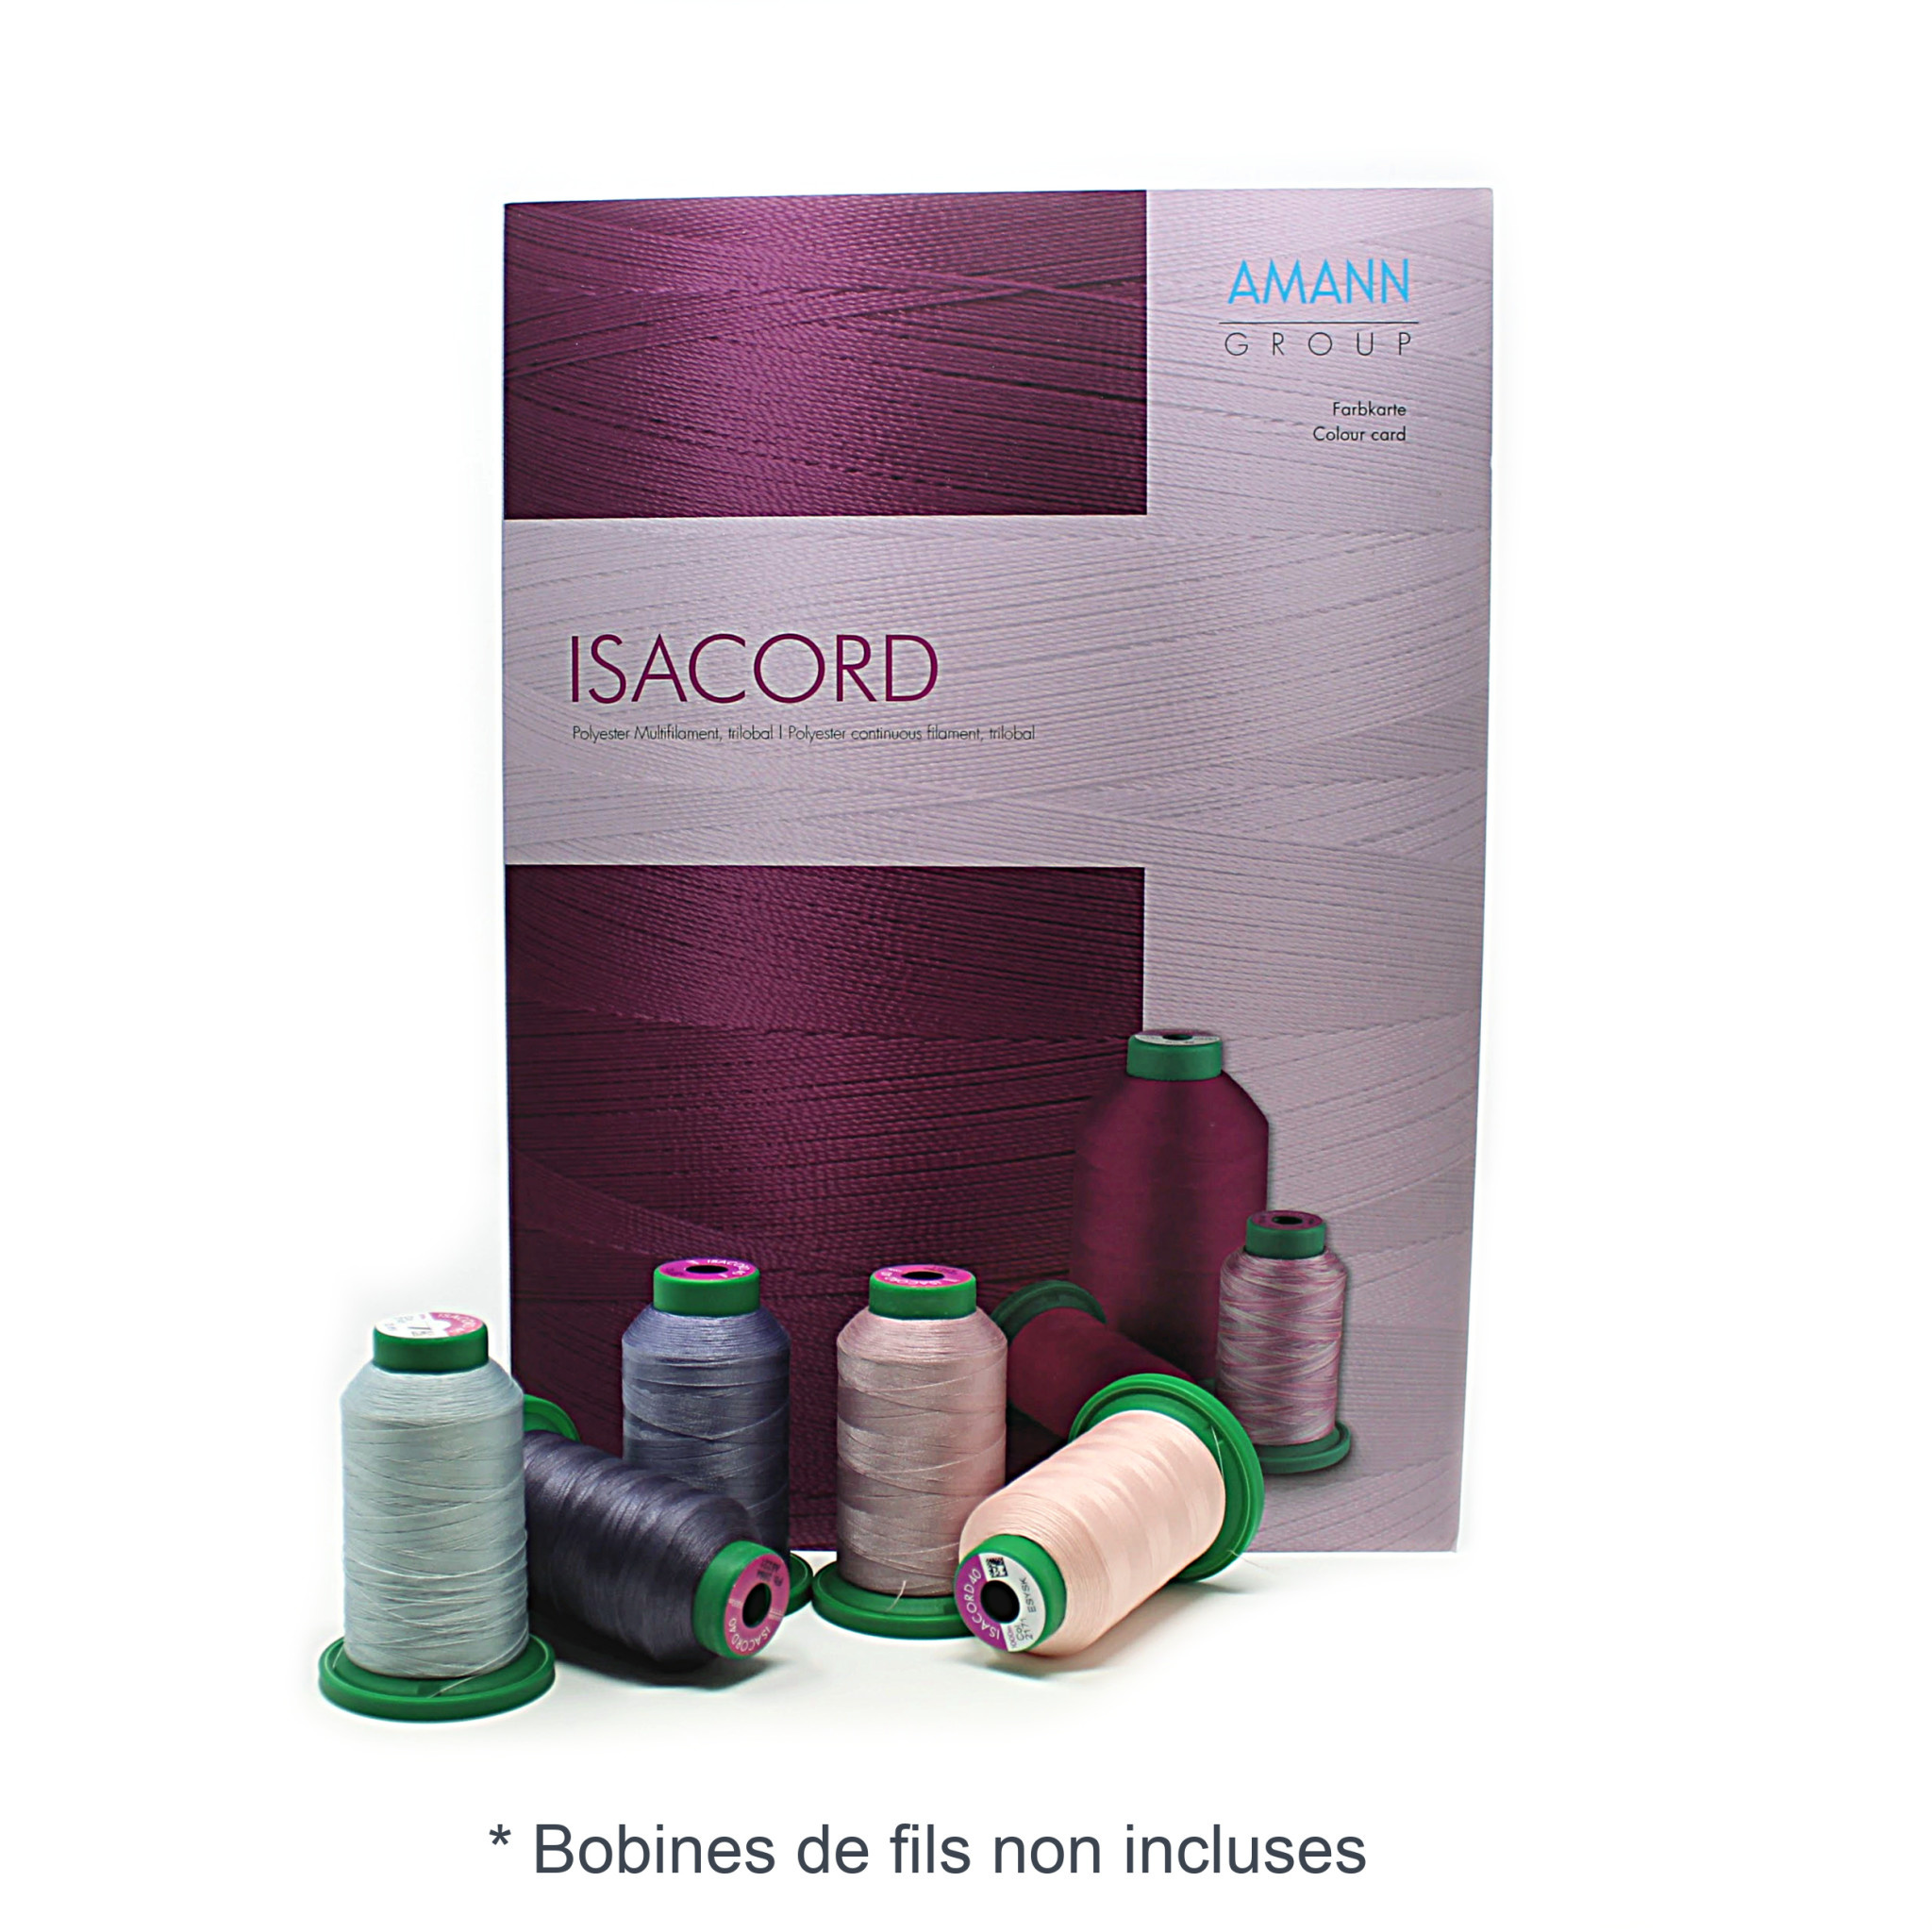 Isacord Isacord colour chart with wrapped thread samples